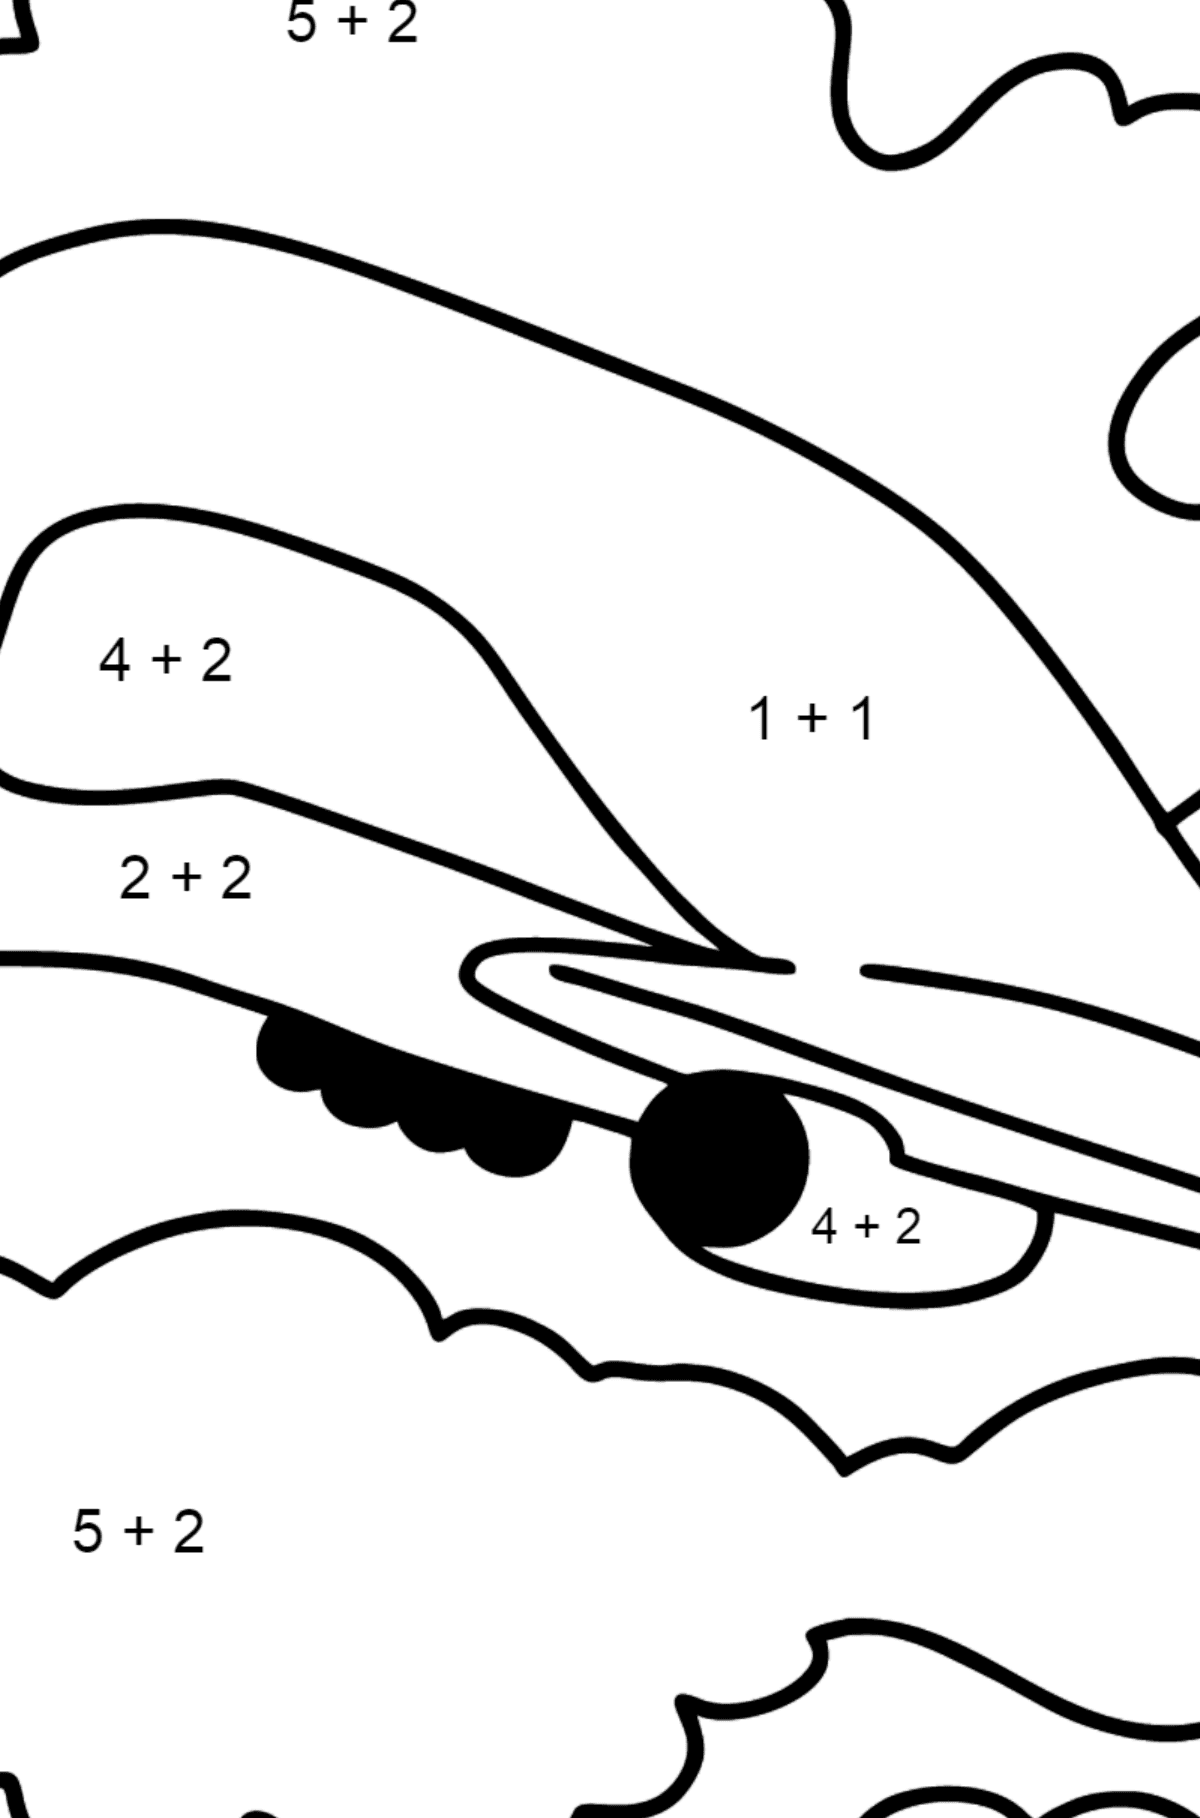 Cargo Plane coloring page - Math Coloring - Addition for Kids